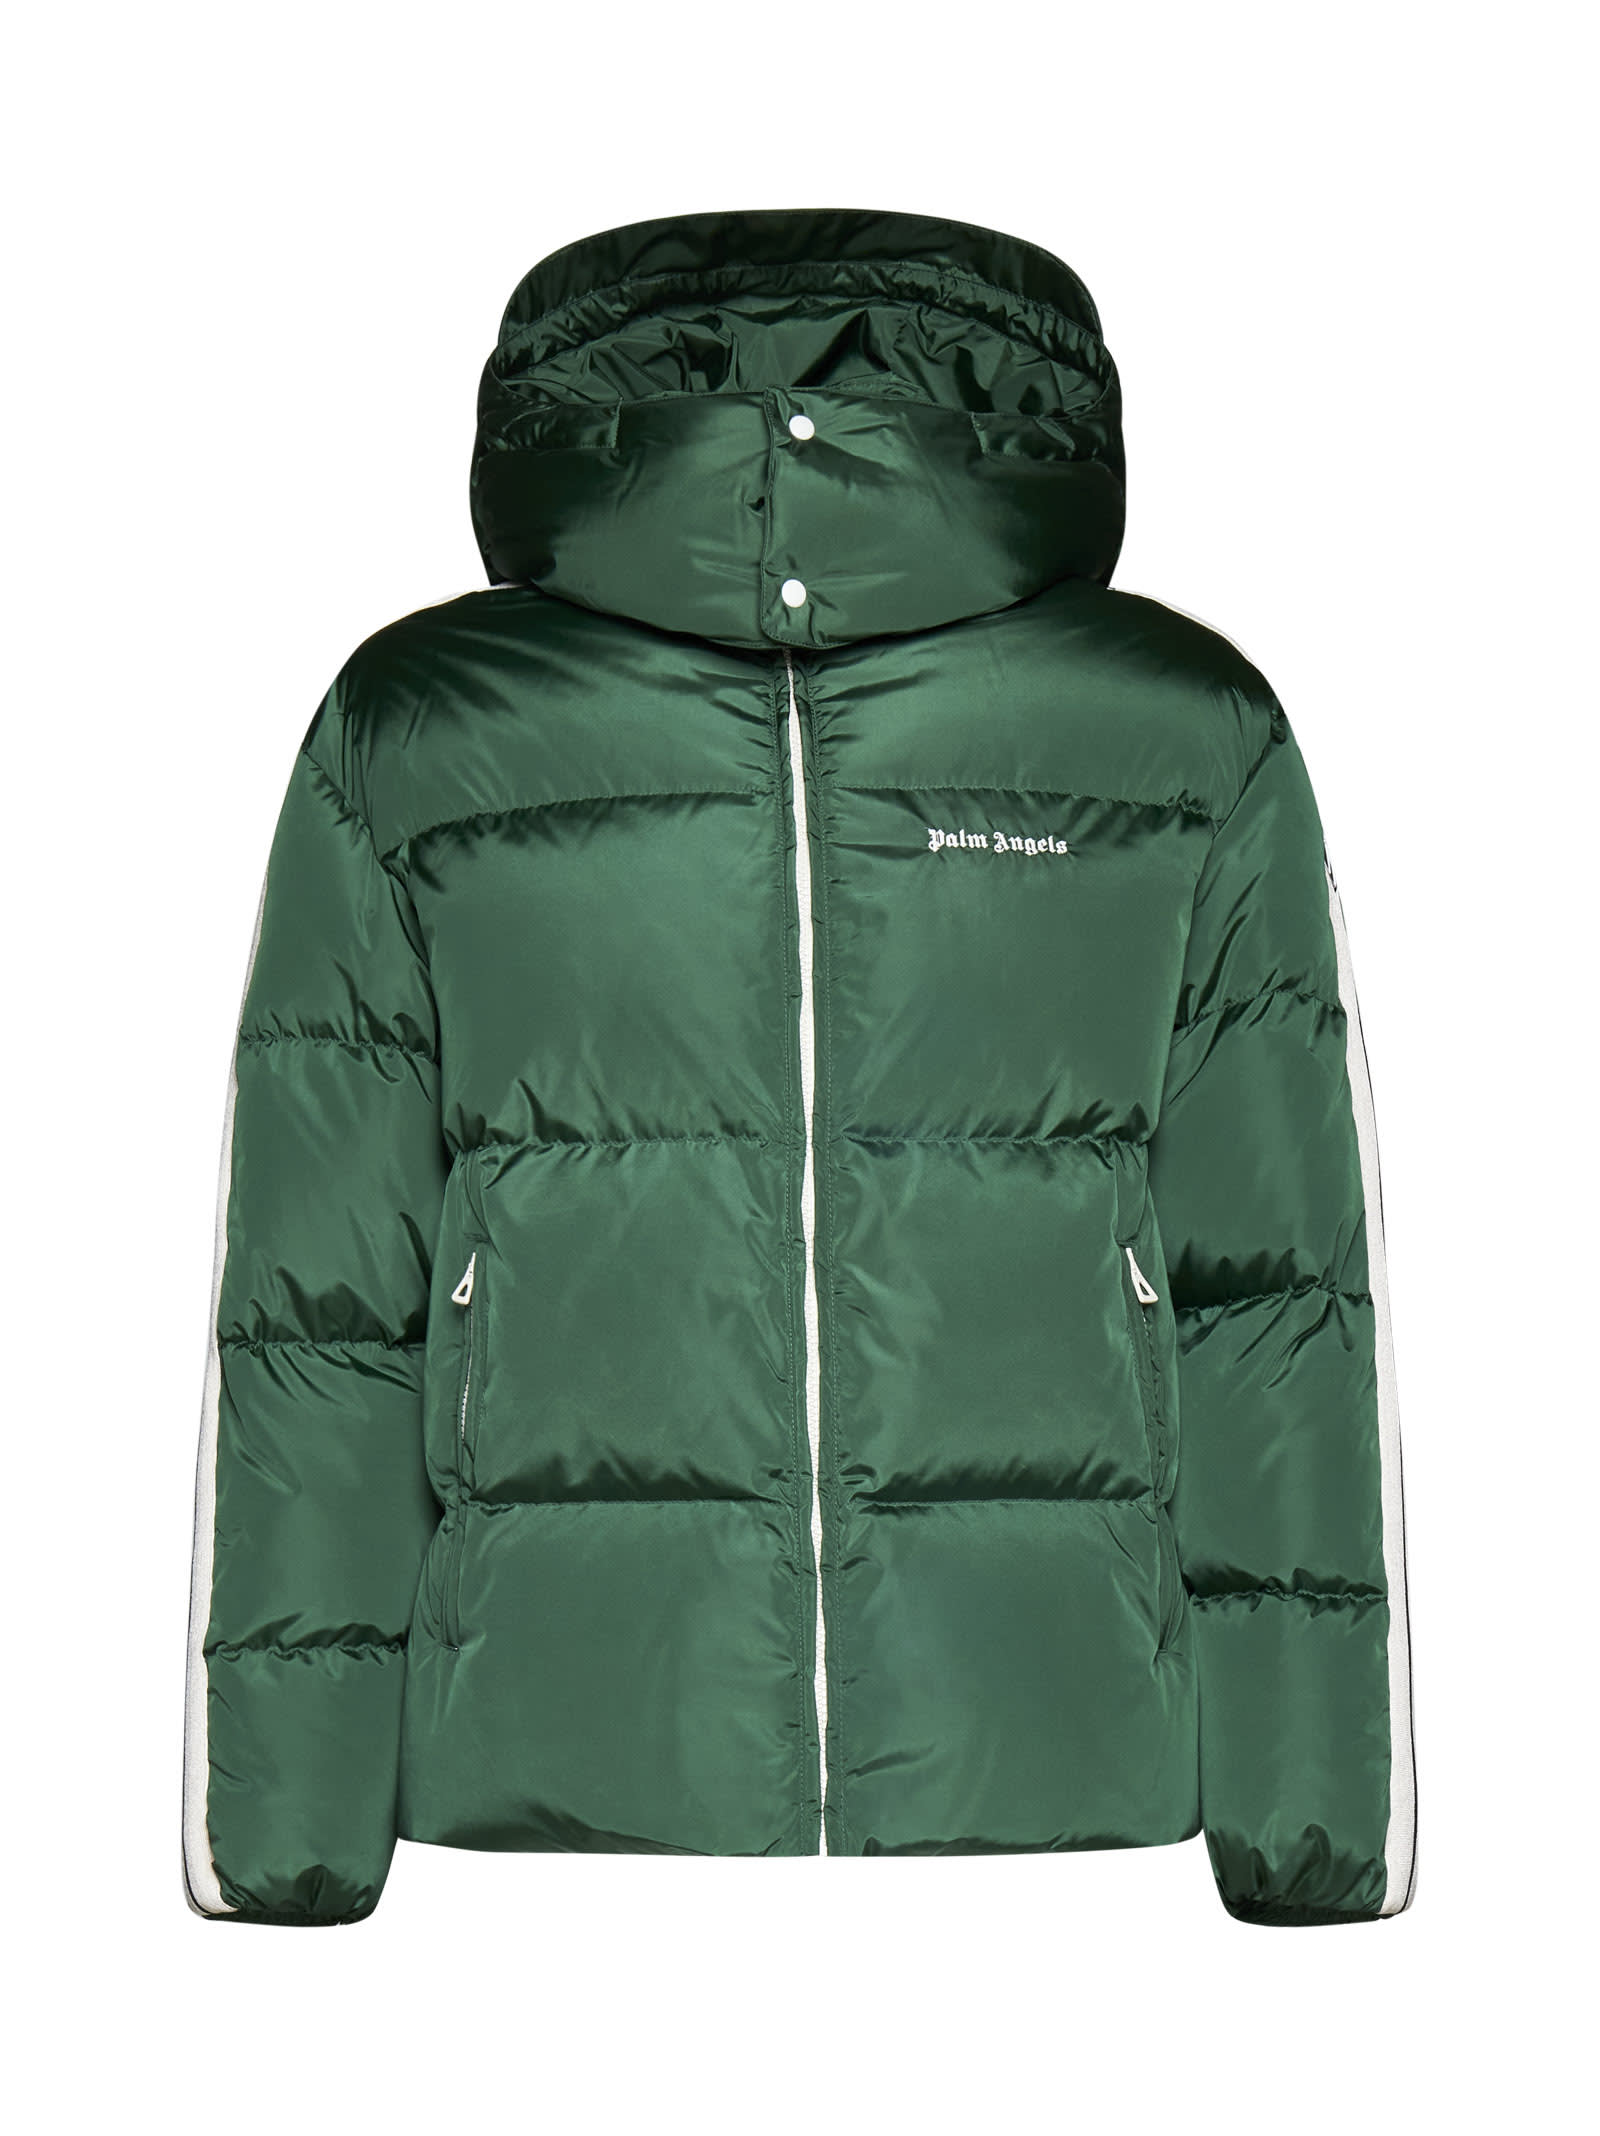 PALM ANGELS DOWN JACKET